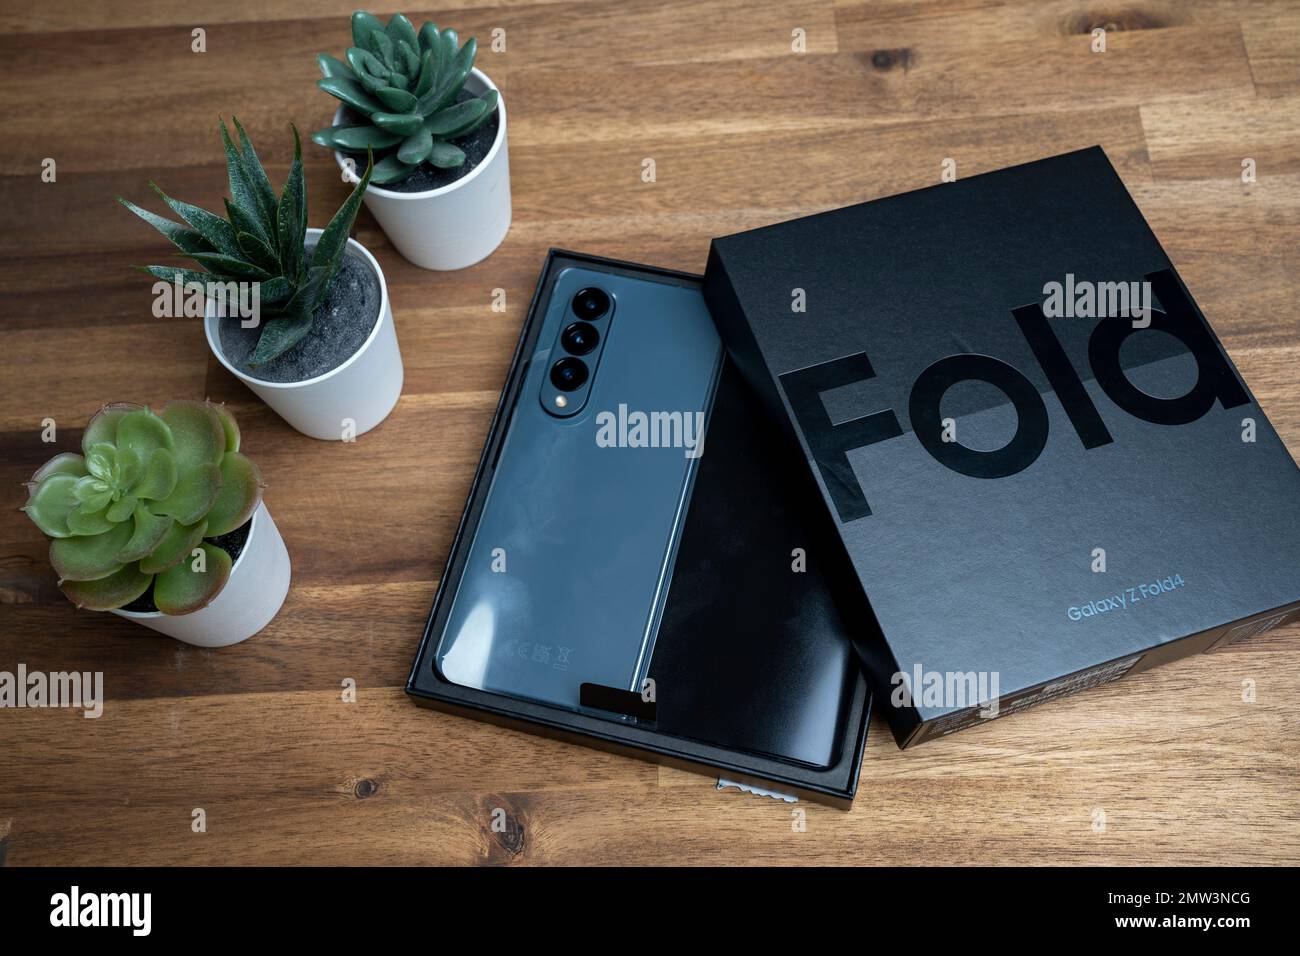 Brand new Samsung Galaxy Z Fold 4 in grey-green color. The device is in the open position. Stock Photo